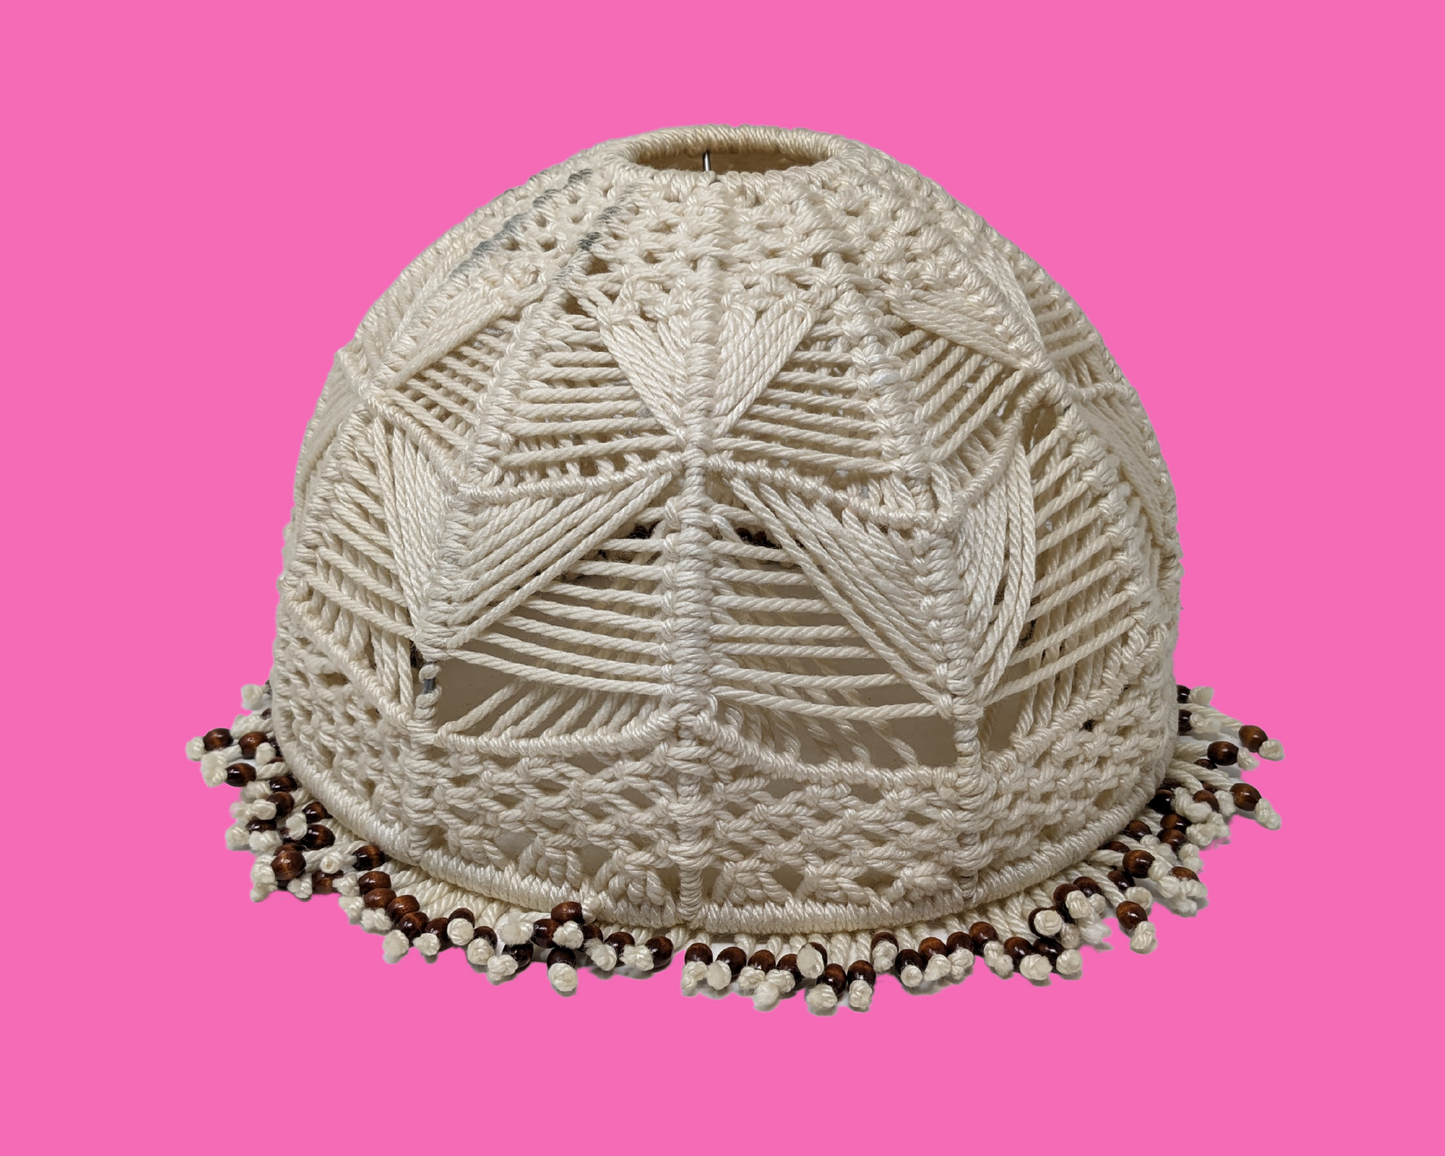 Vintage 1970's White Wool, Crochet, Macrame Lamp Shade with Beads